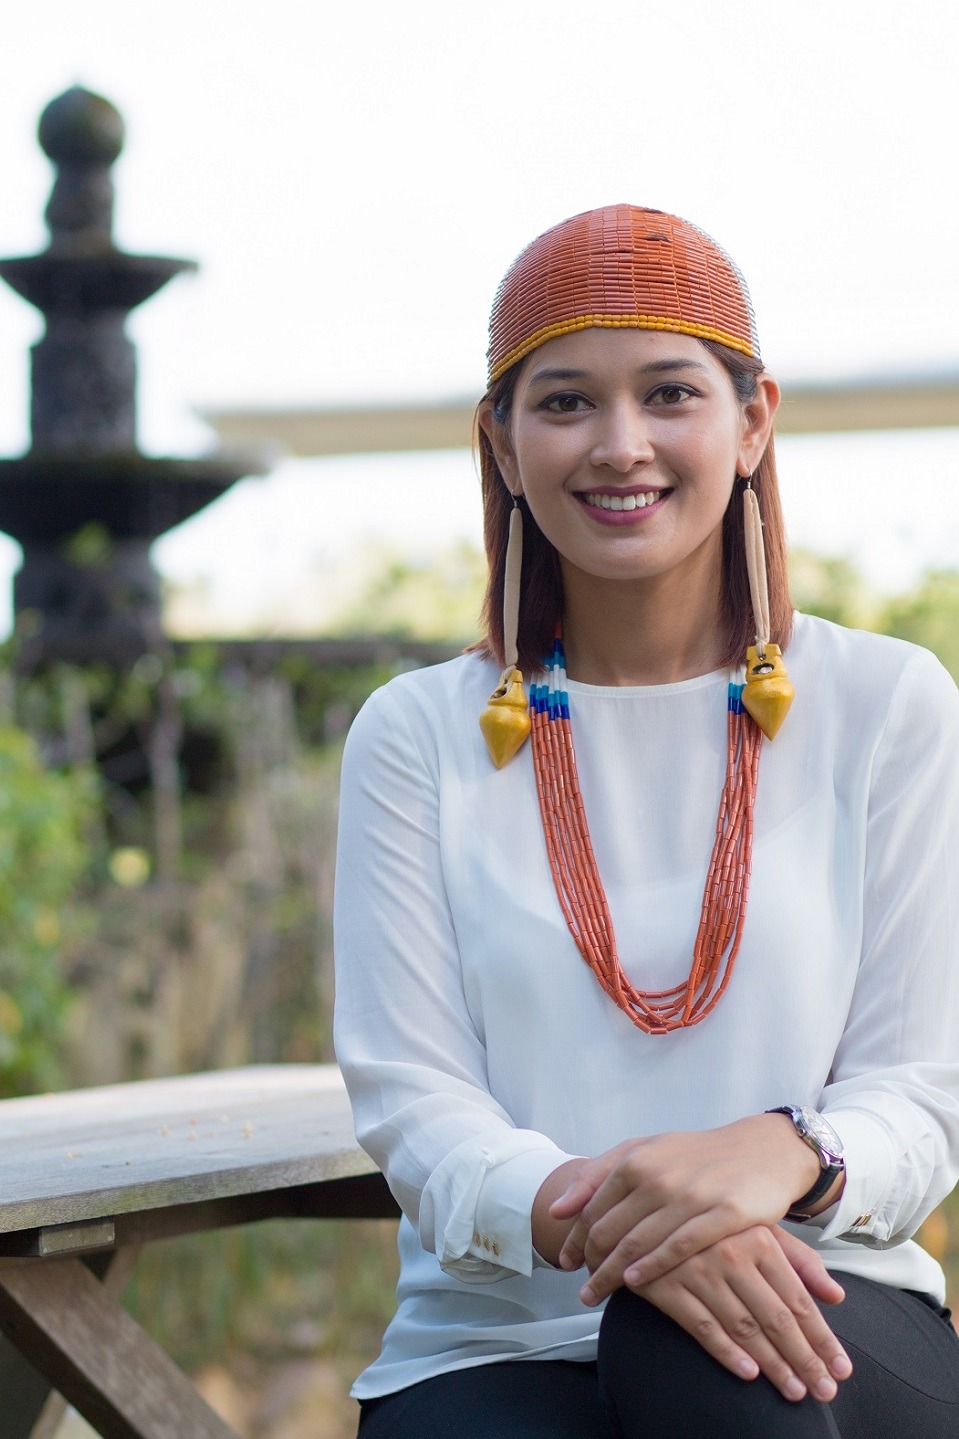 “I started learning Sarawak’s cultural dances more than 10 years ago in secondary school. Since then, I’ve been performing at weddings or dinner events in and around Miri. My favourite dances are those of the Iban and Orang Ulu. The movements are...